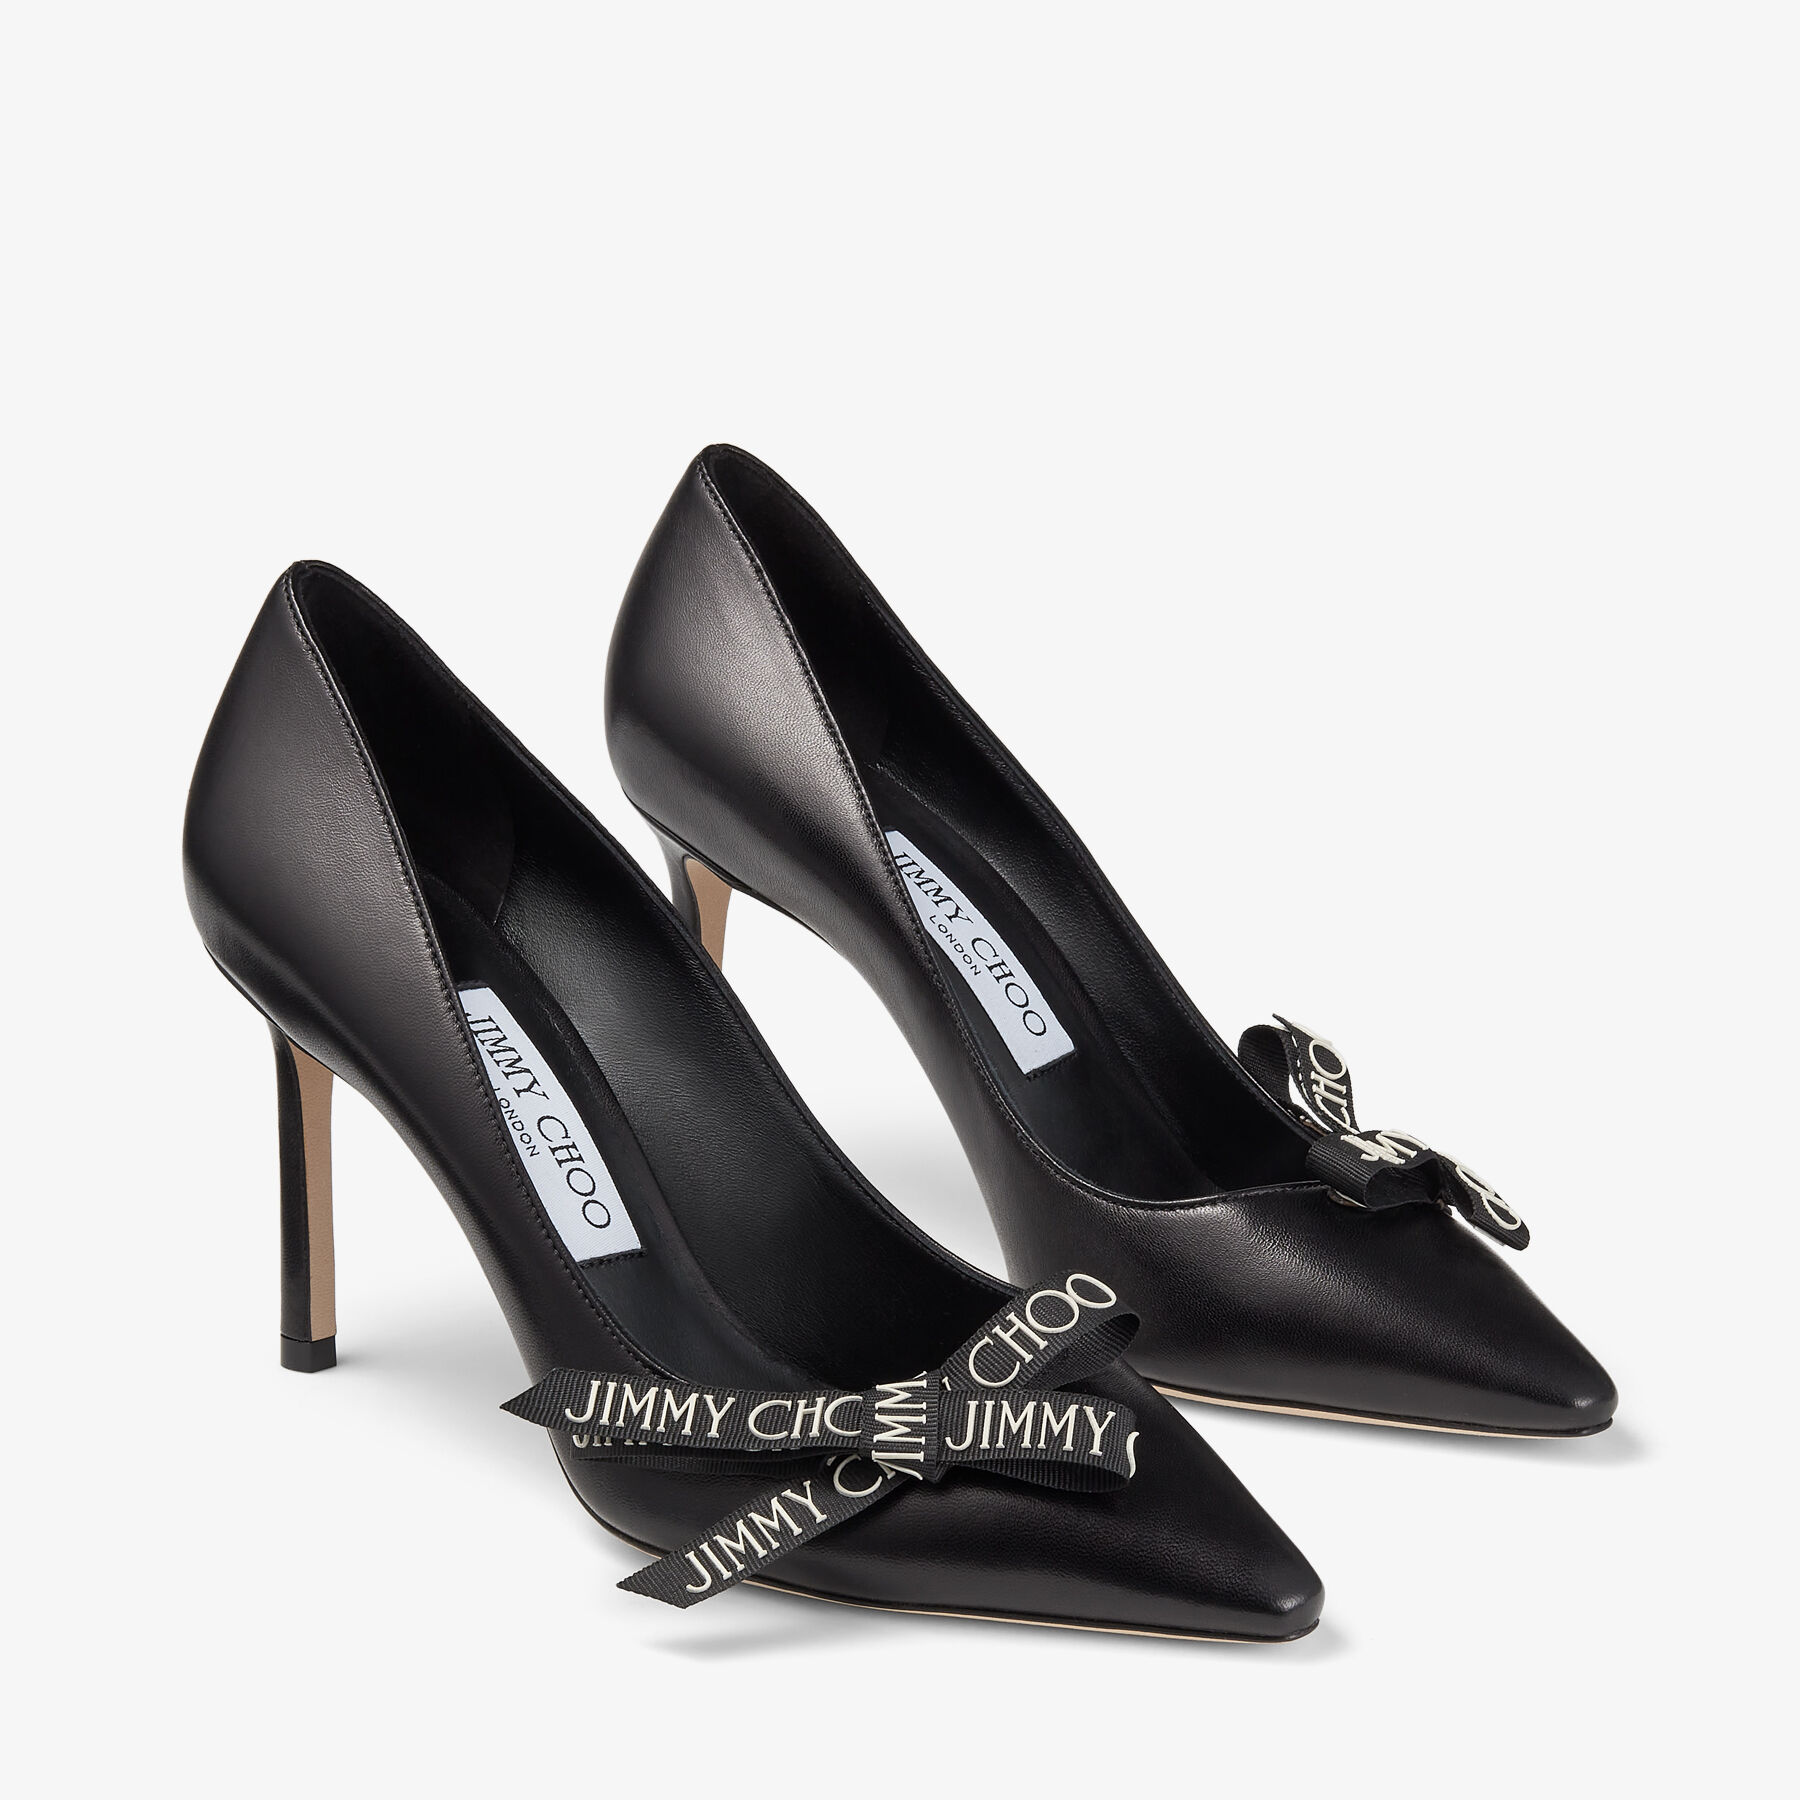 ROMY 85 | Black Nappa Leather Pumps with Jimmy Choo Bow | Spring 